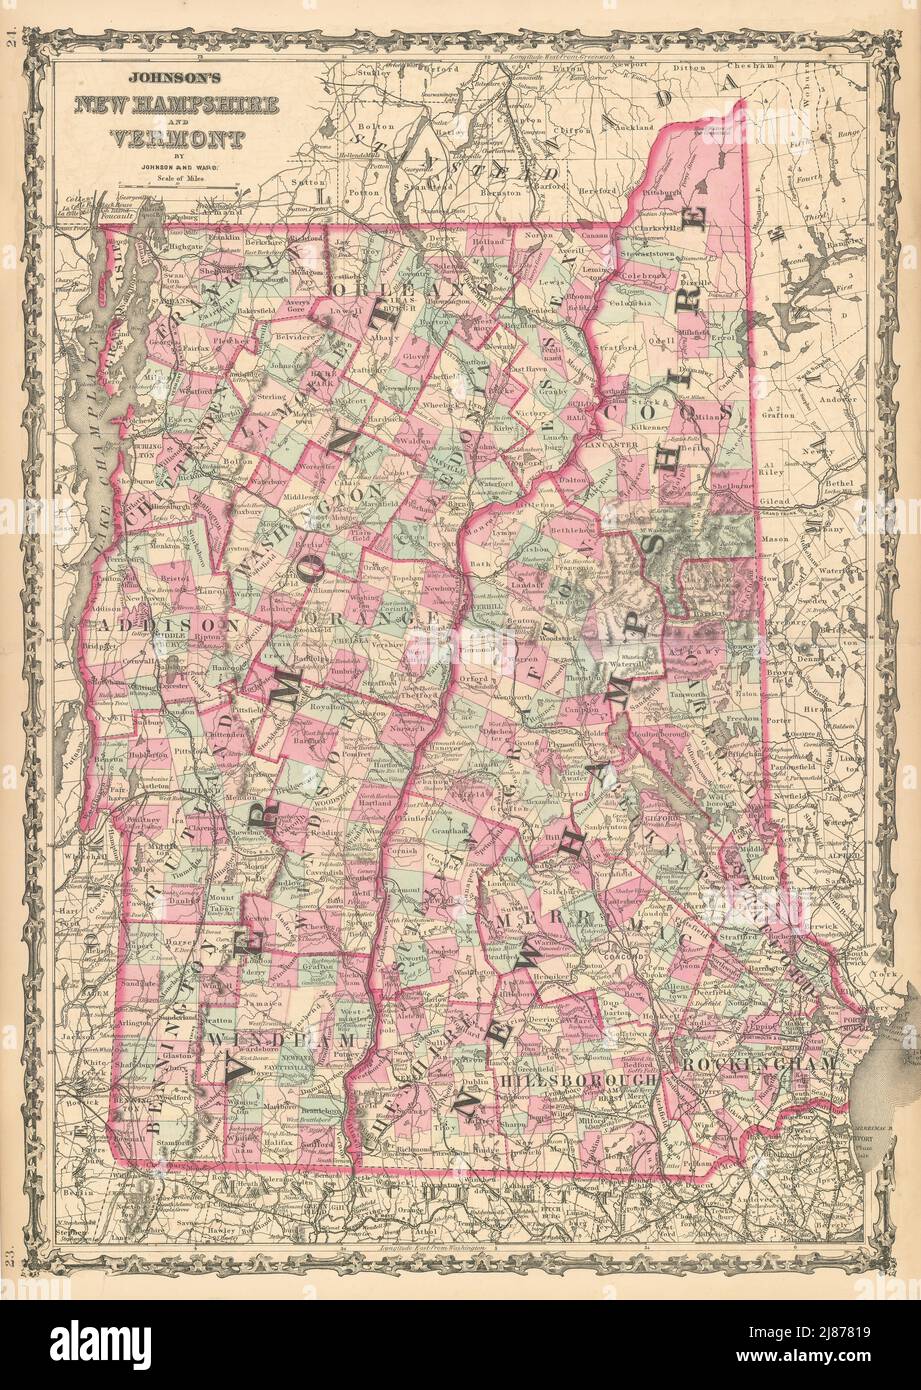 Johnson's New Hampshire & Vermont. US State map showing counties 1862 old Stock Photo